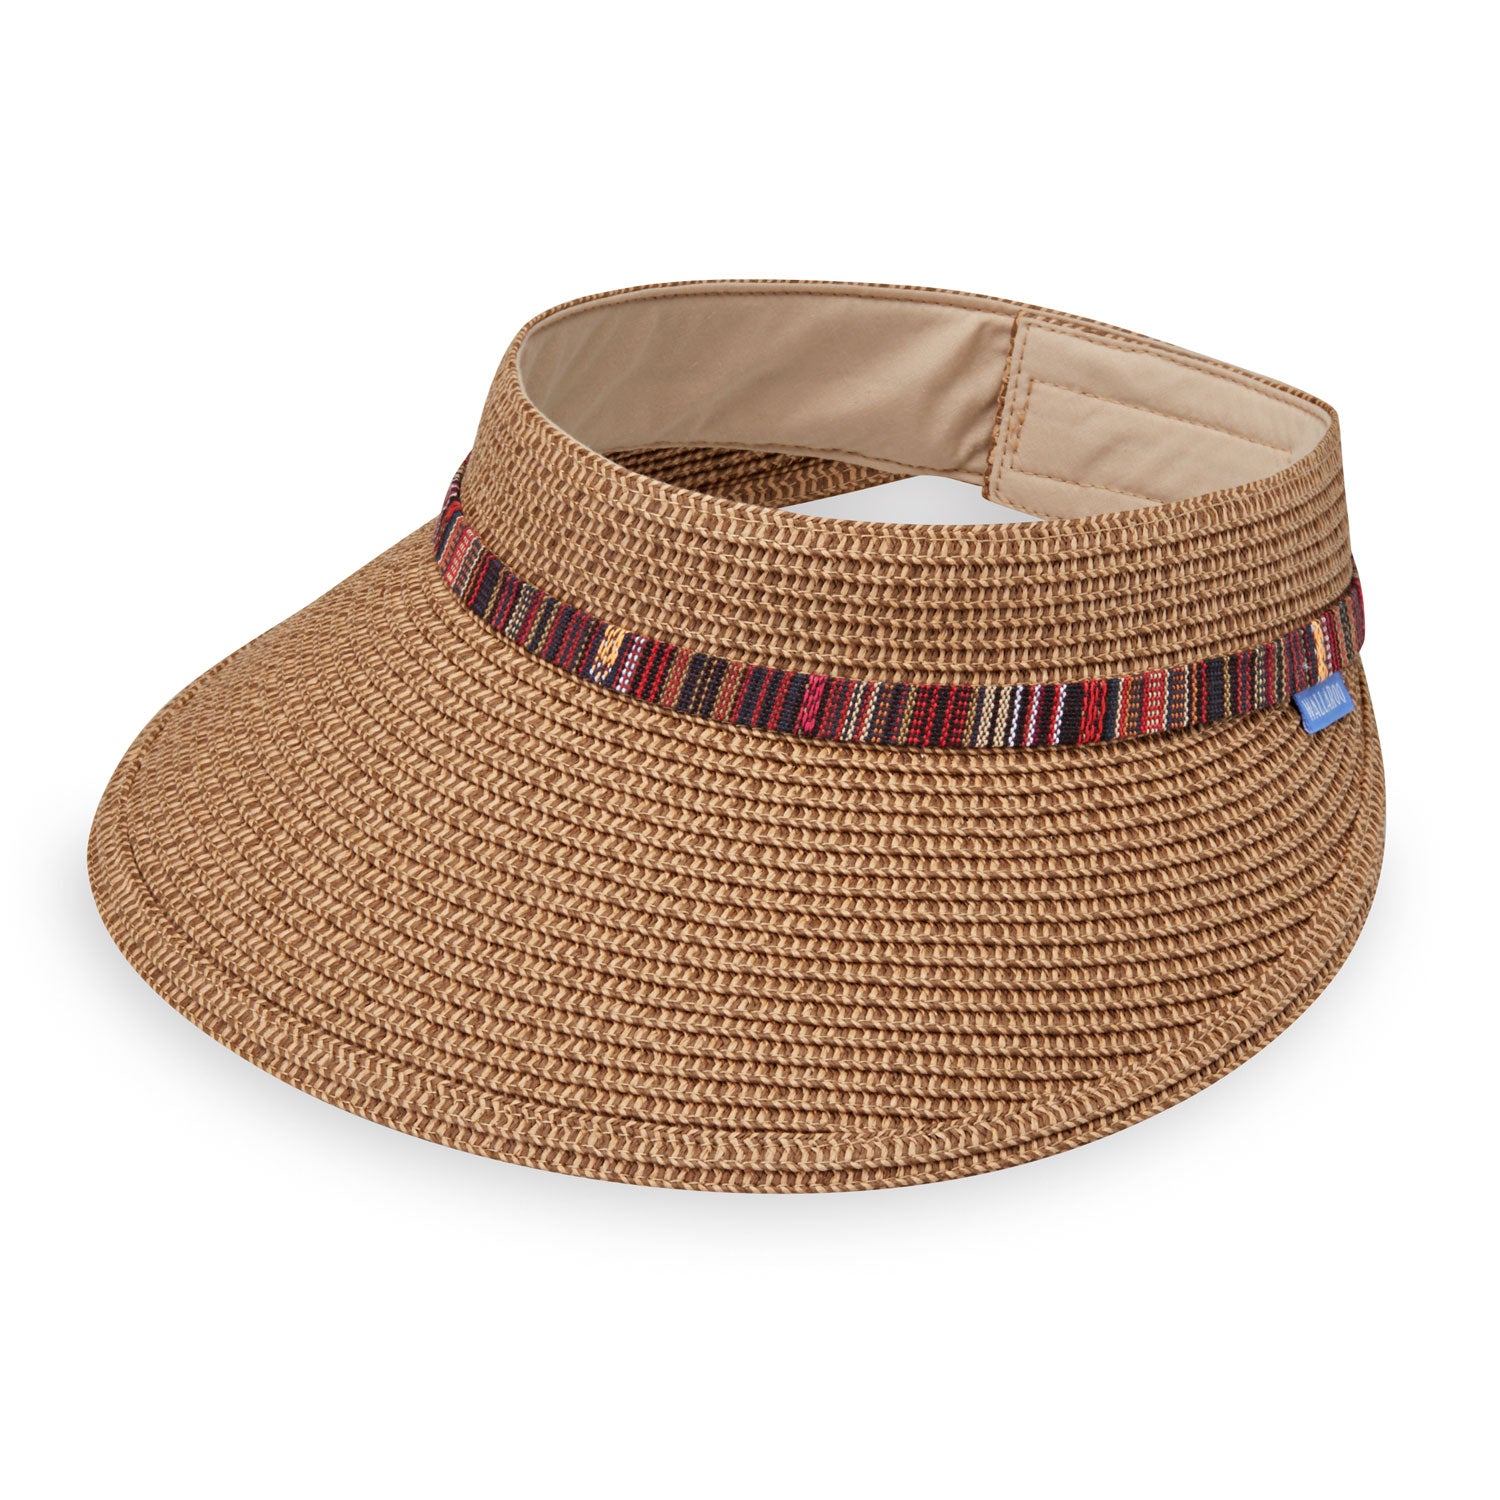 Featuring Front of Women's Packable Sedona Paper Braid Sun Protection Visor in Camel from Wallaroo